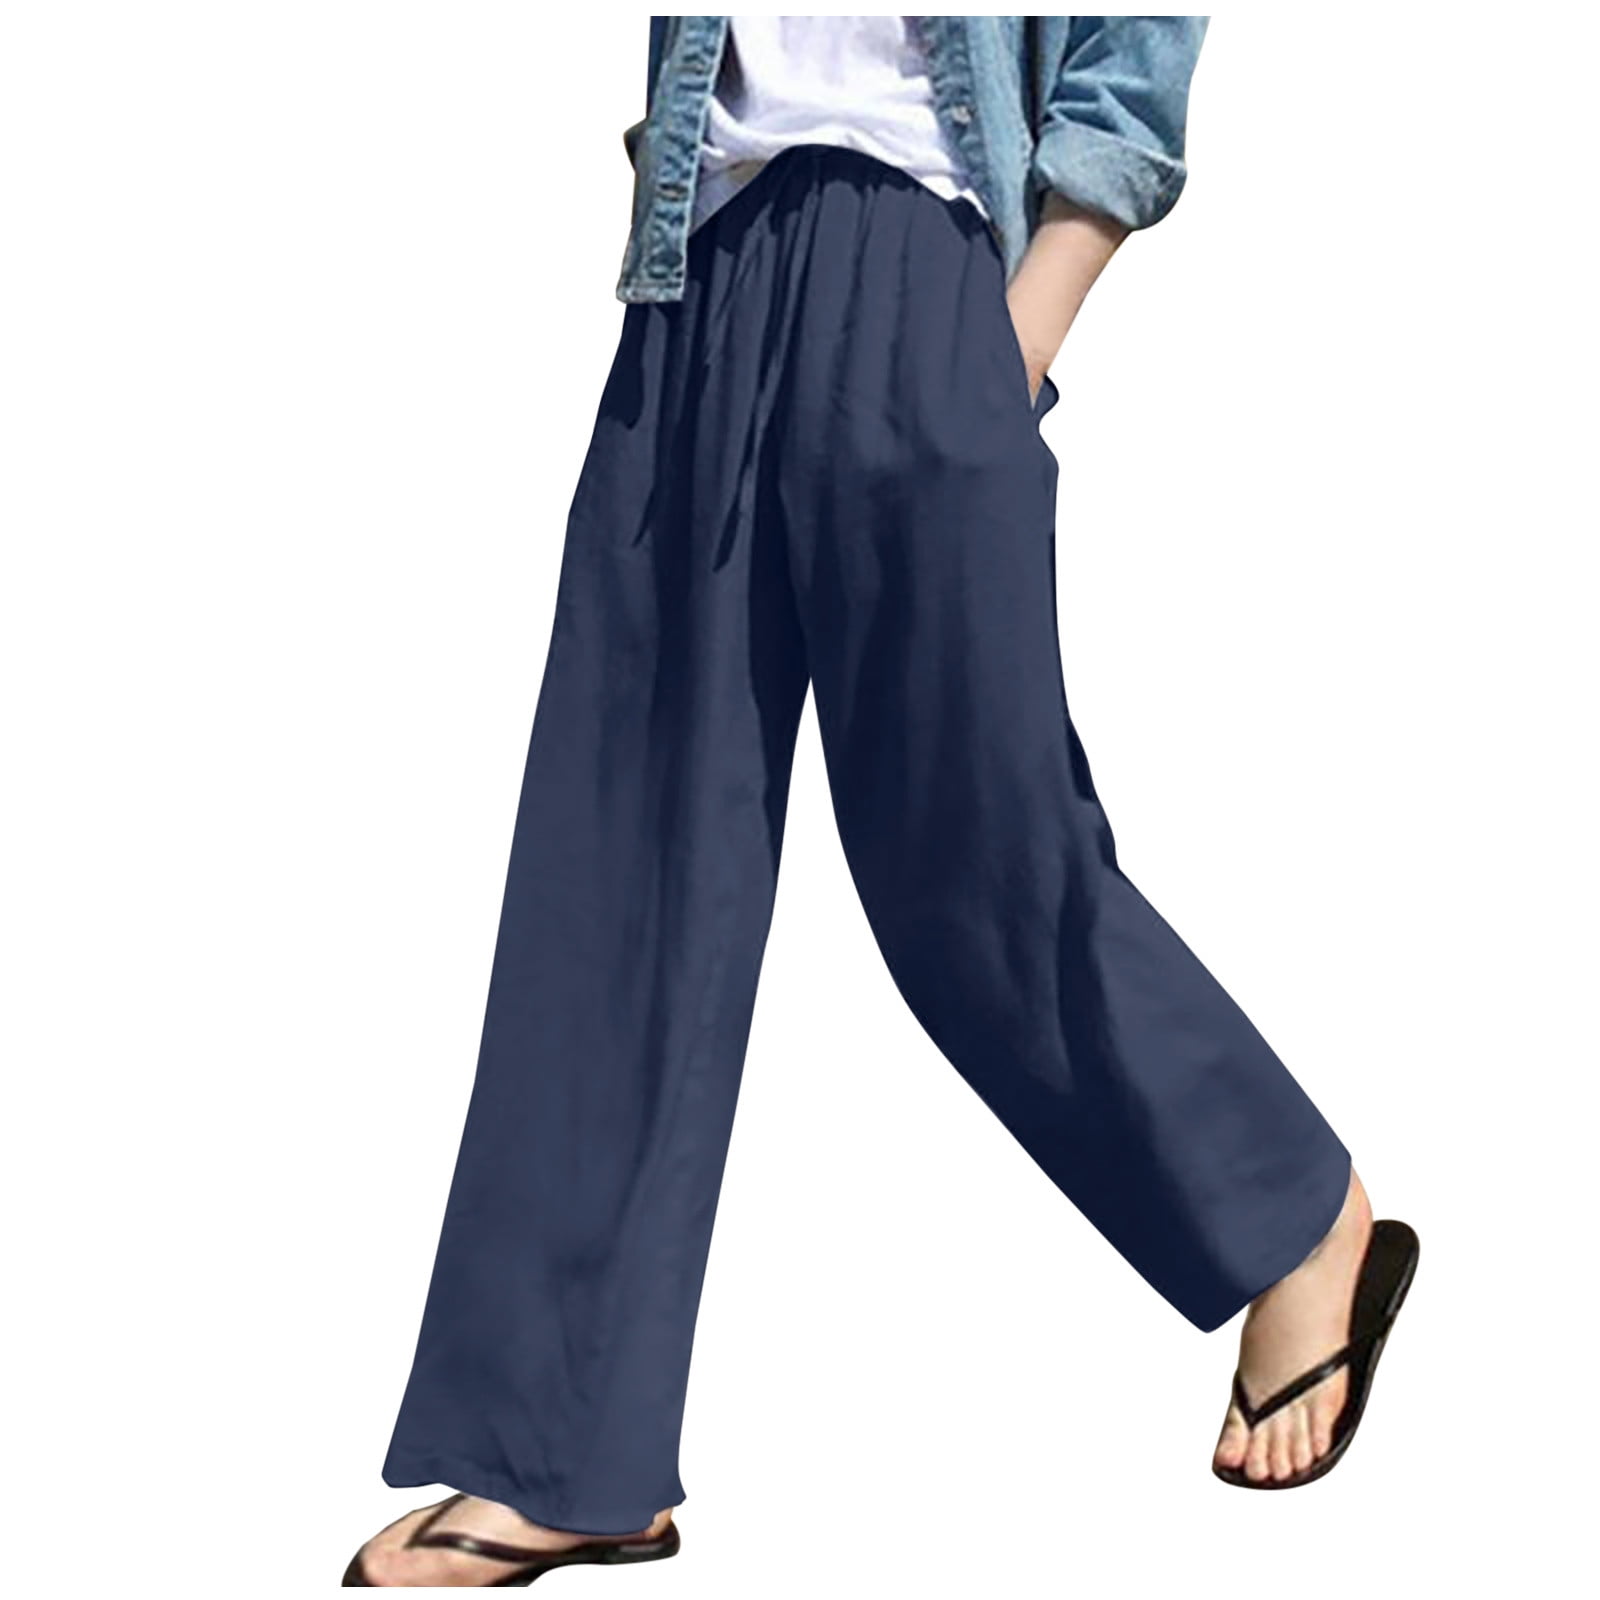 Floral Print Drawstring Wide Leg Beach Wide Leg Sweatpants Womens For Women  Leosoxs Spring/Autumn Loose Fit Long Pants In Plus Size 211007 From Bai06,  $9.79